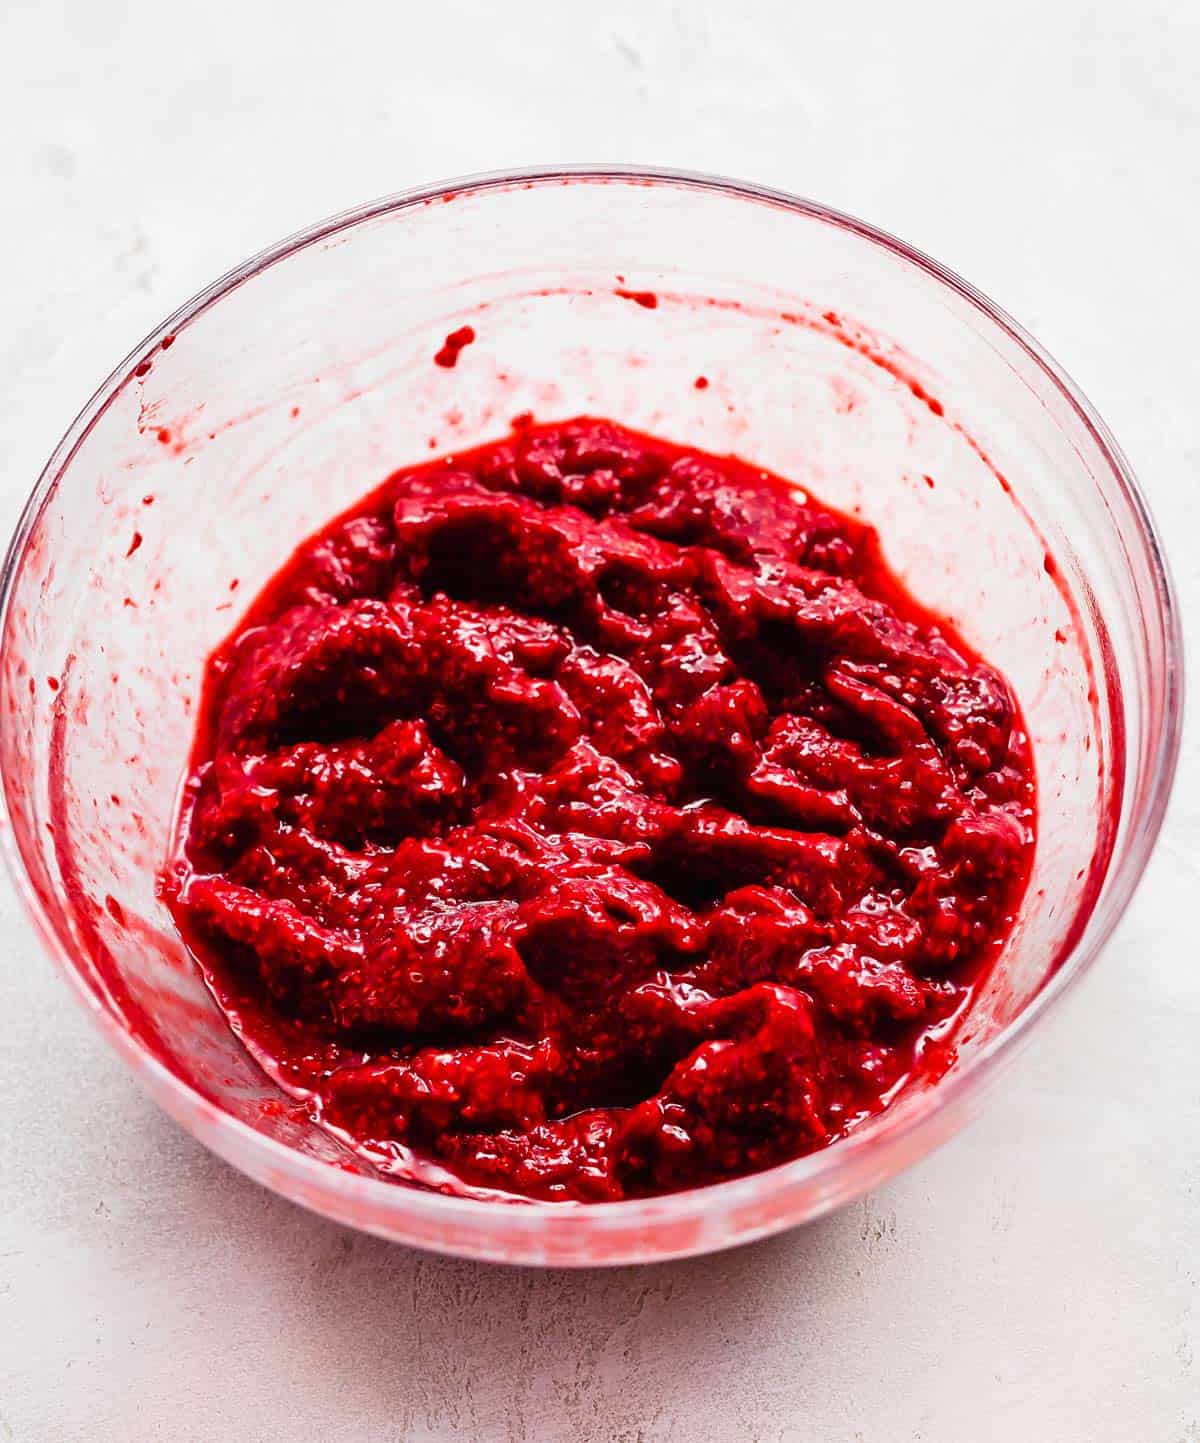 Mashed frozen raspberries to make freezer jam in a glass bowl on a white background.